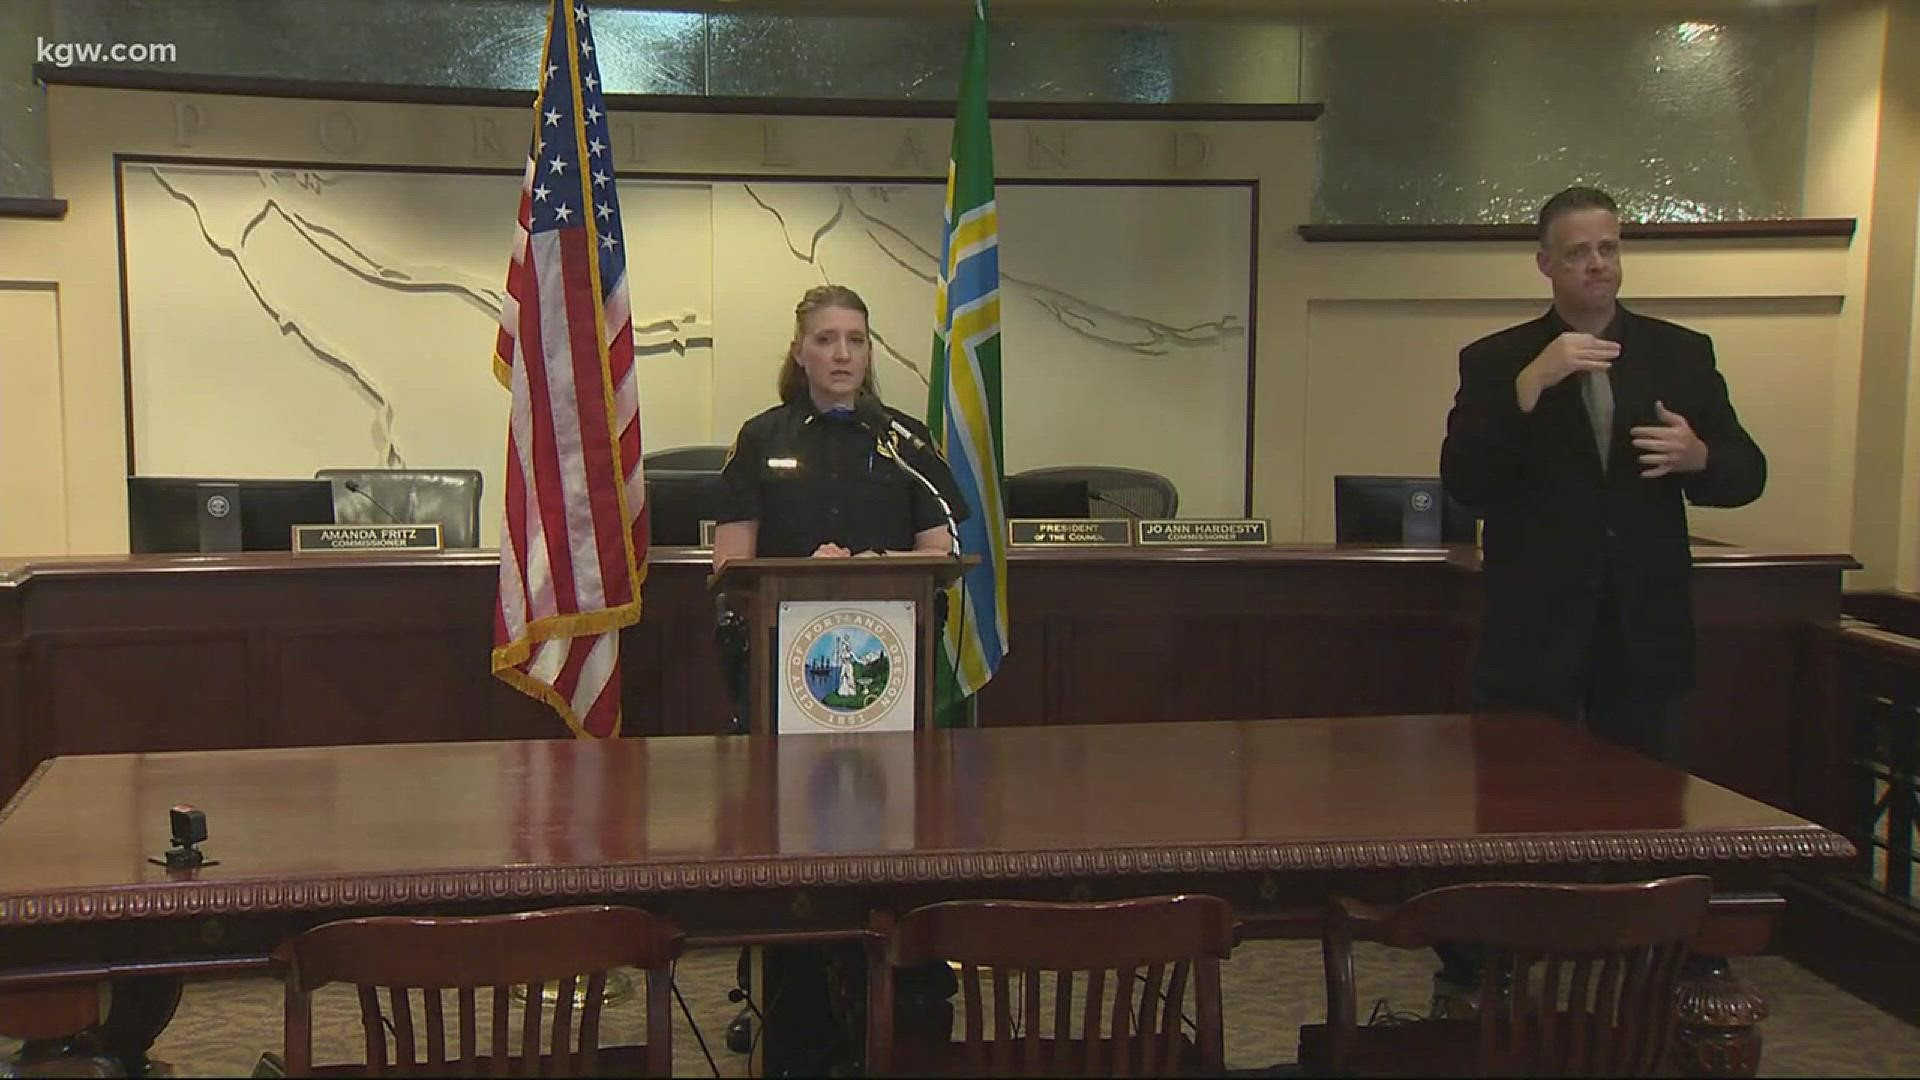 Portland leaders condemned the riots that began following a peaceful vigil and march in honor of George Floyd on the evening of Friday, May 29.